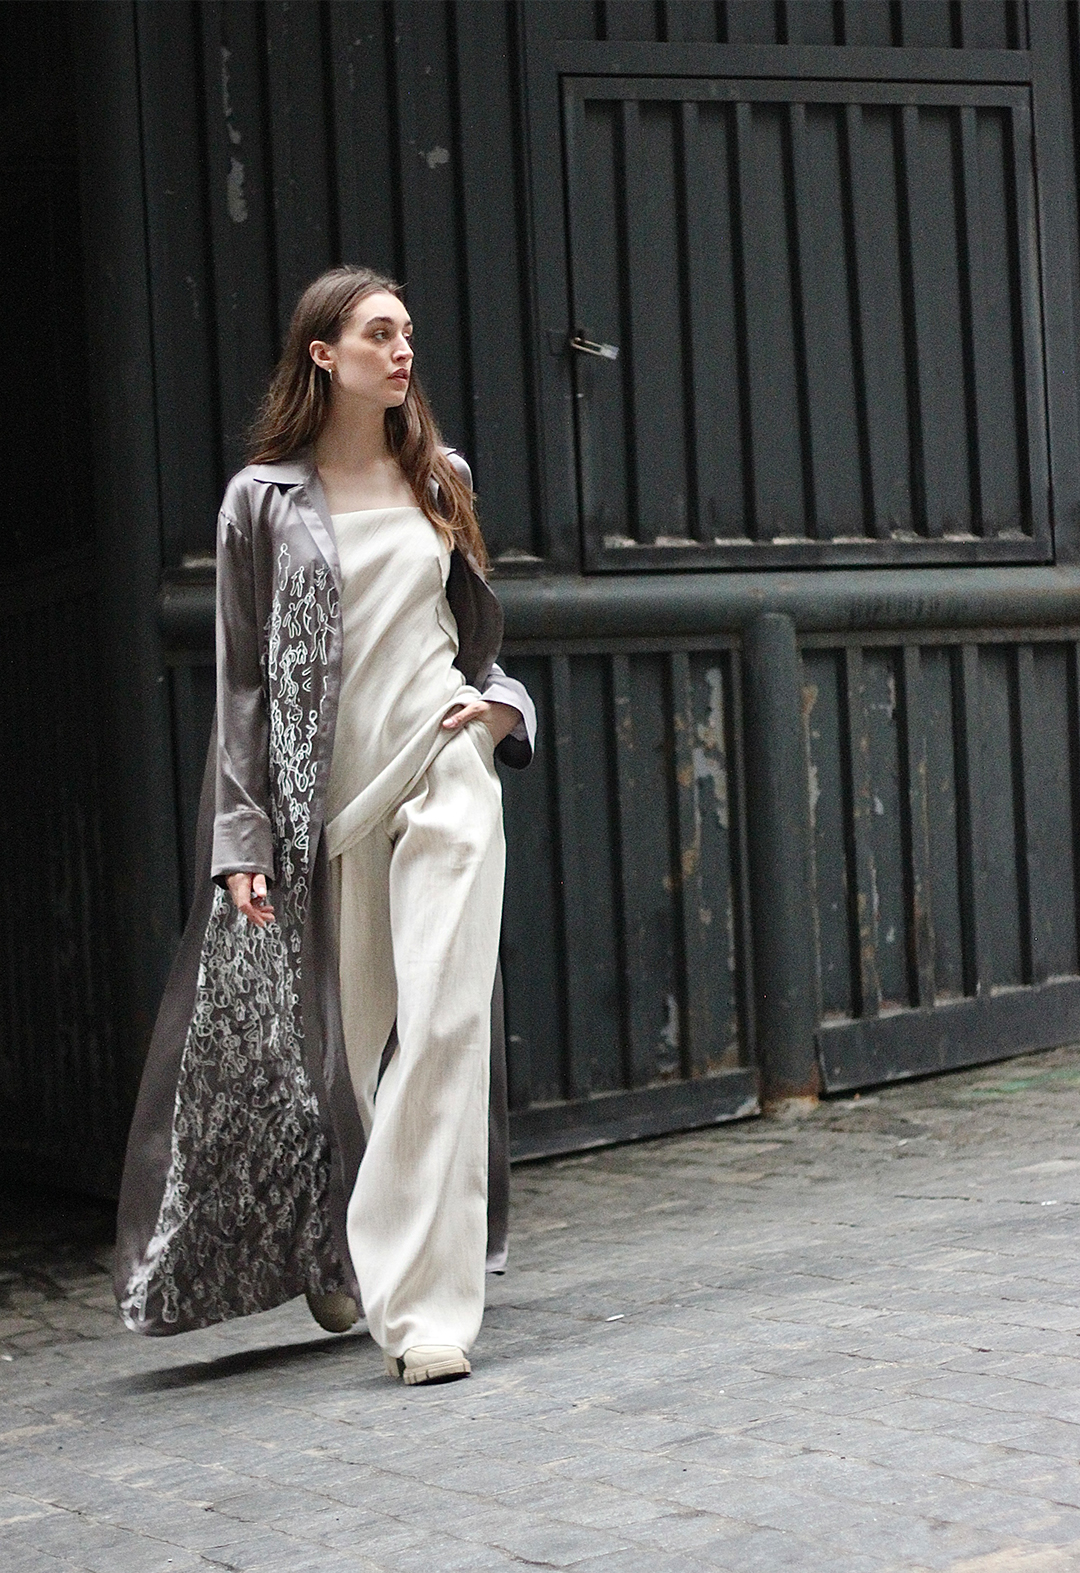 A model is walking while looking to the side with one hand in her pants pocket. She is wearing a gray printed silk shirtdress over a cream slip dress and matching wide-legged pants.